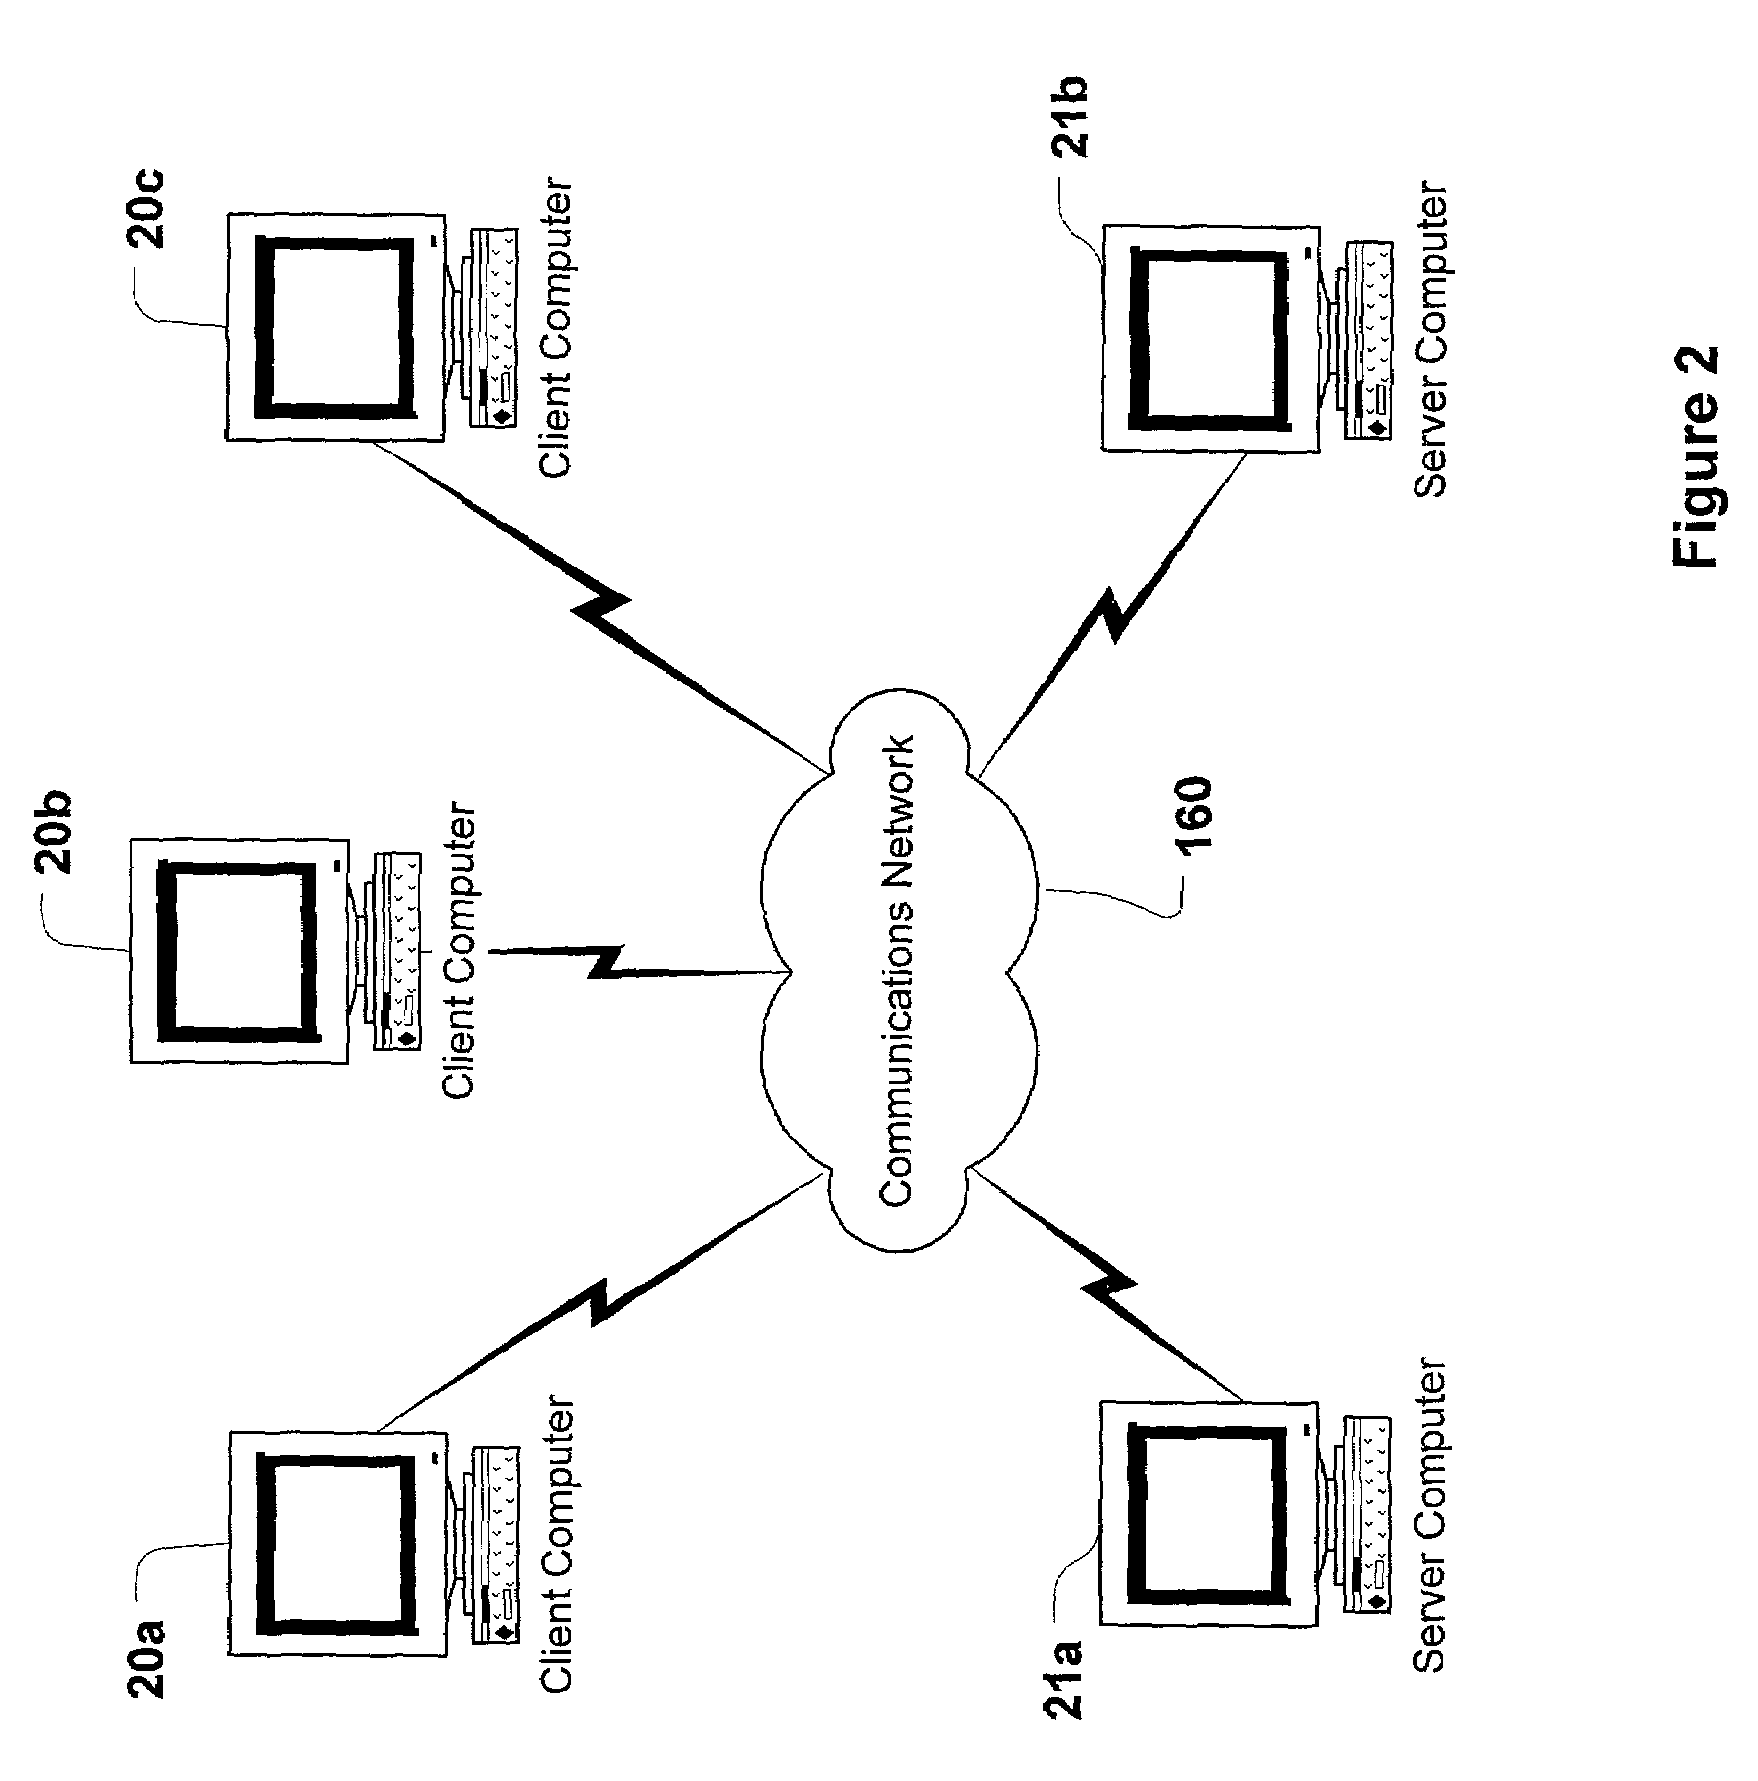 Method and system for providing a distributed querying and filtering system